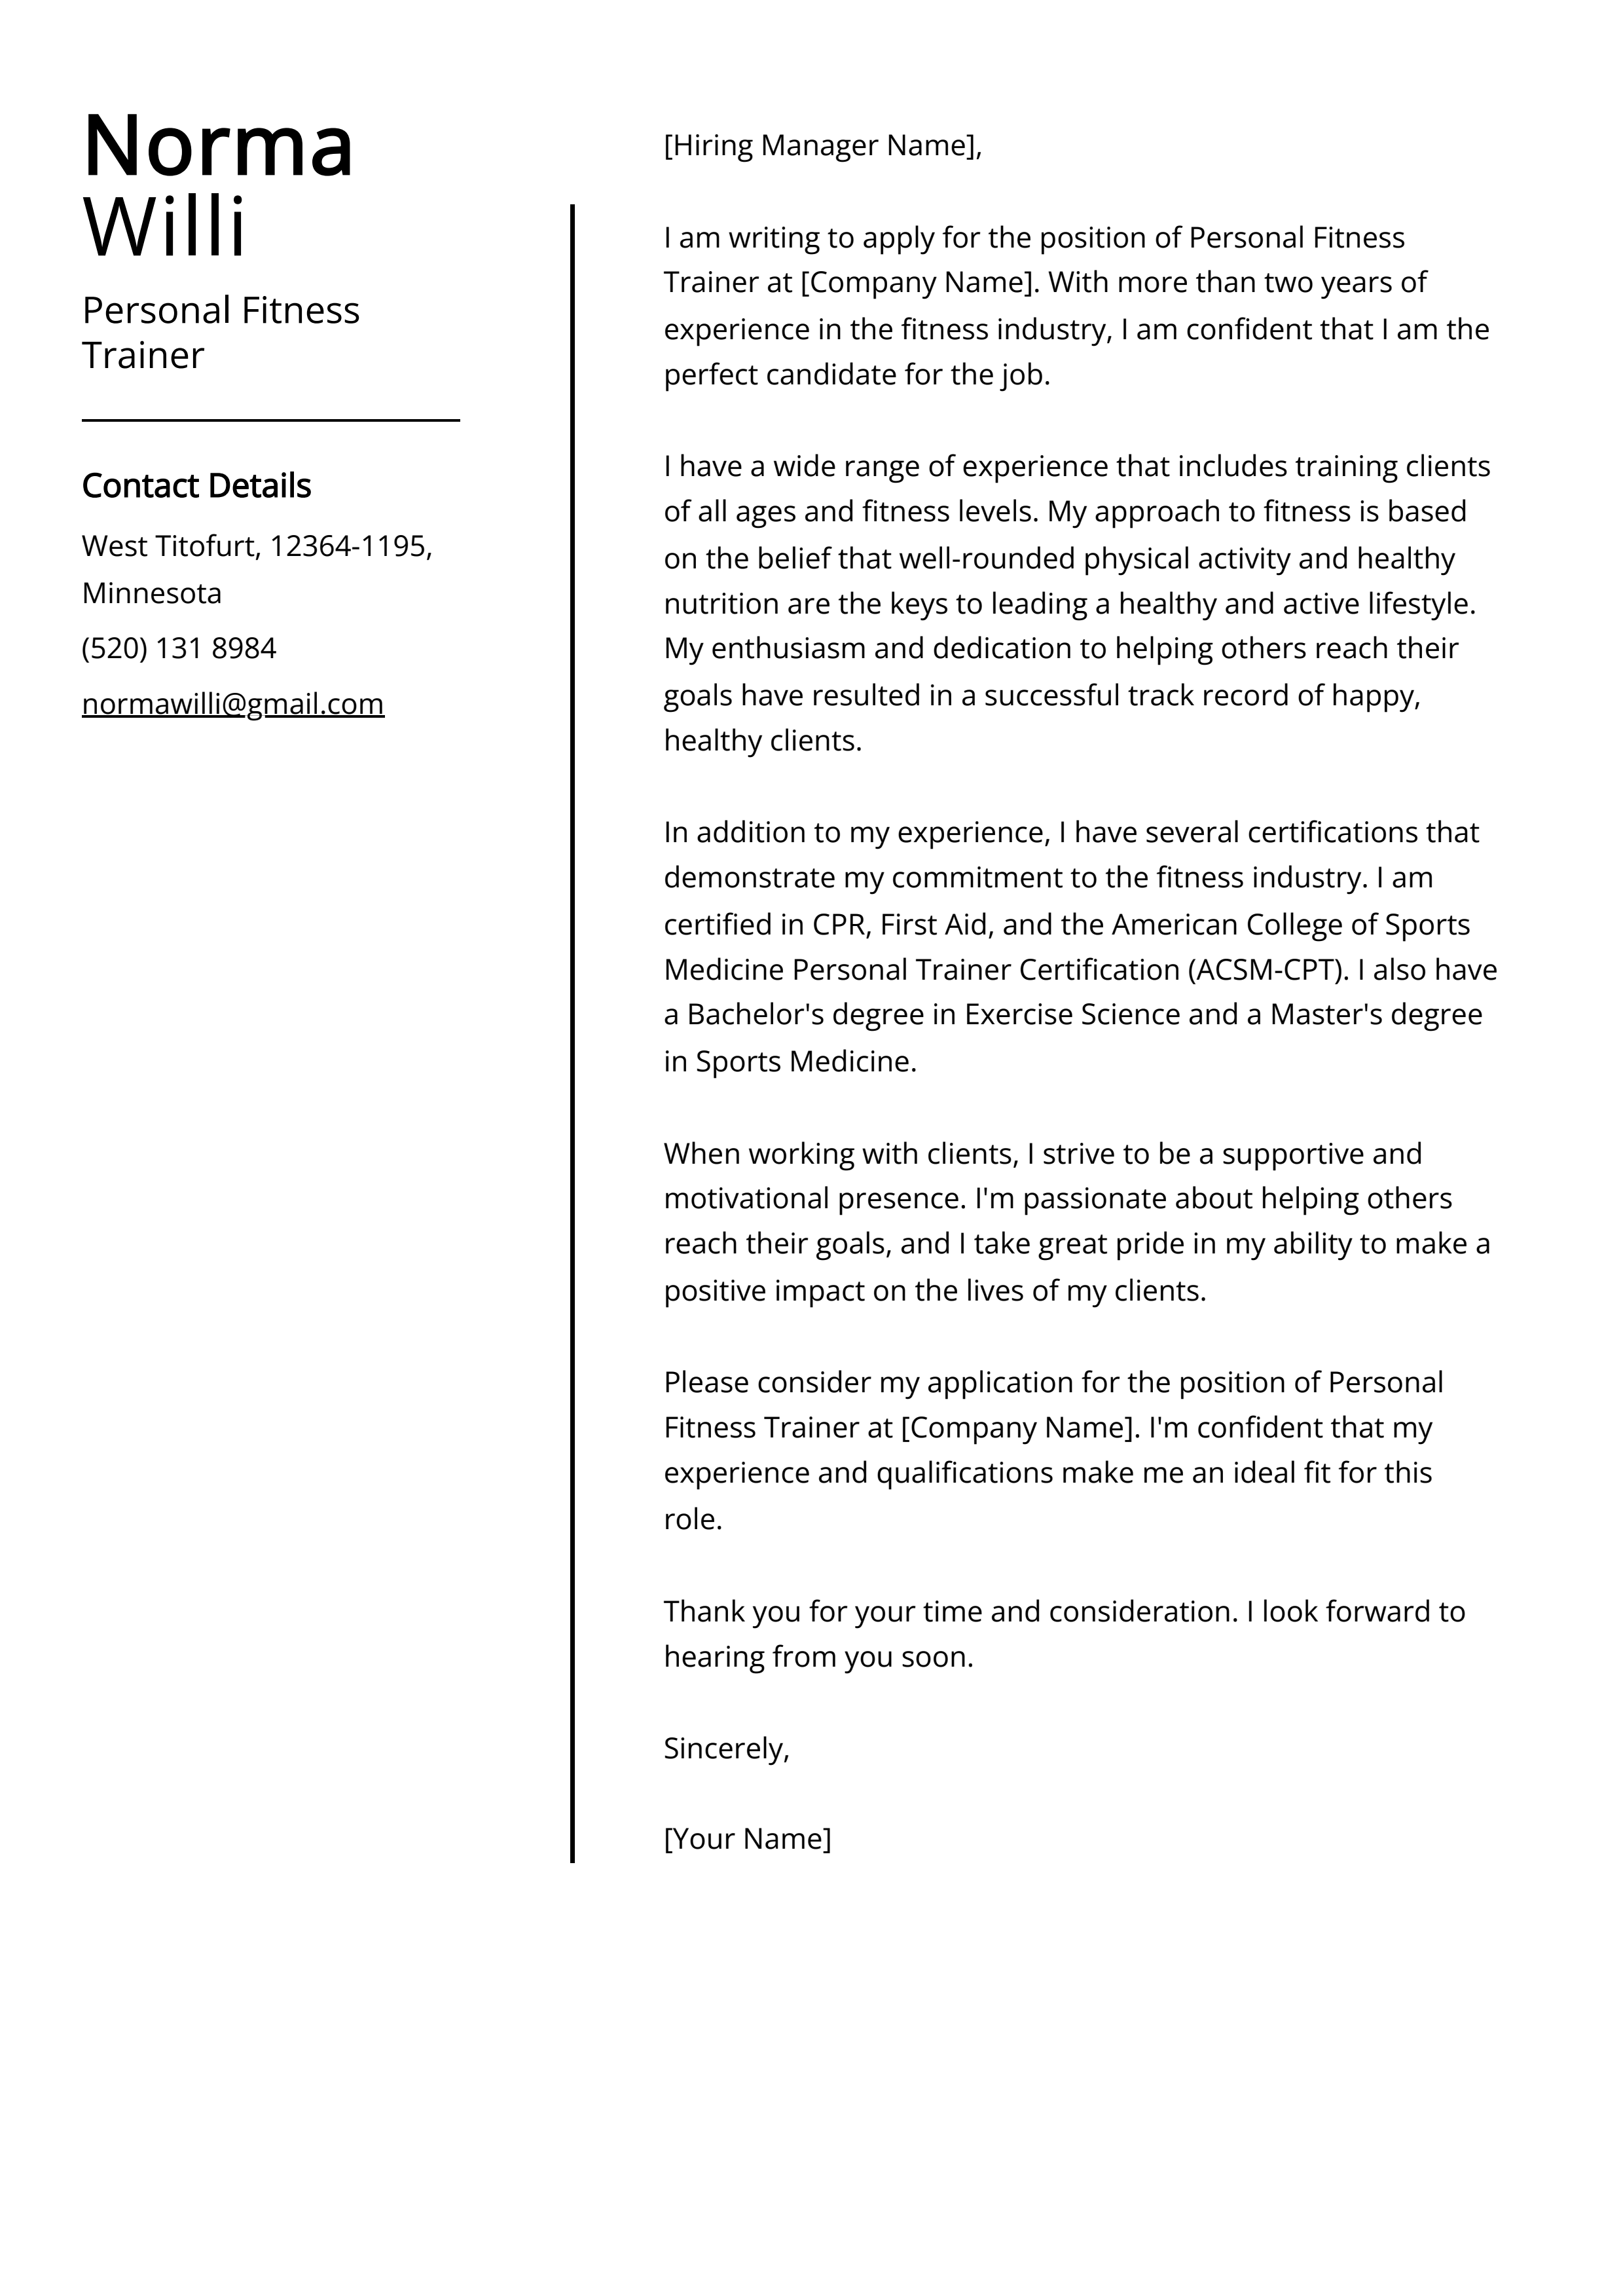 Personal Fitness Trainer Cover Letter Example